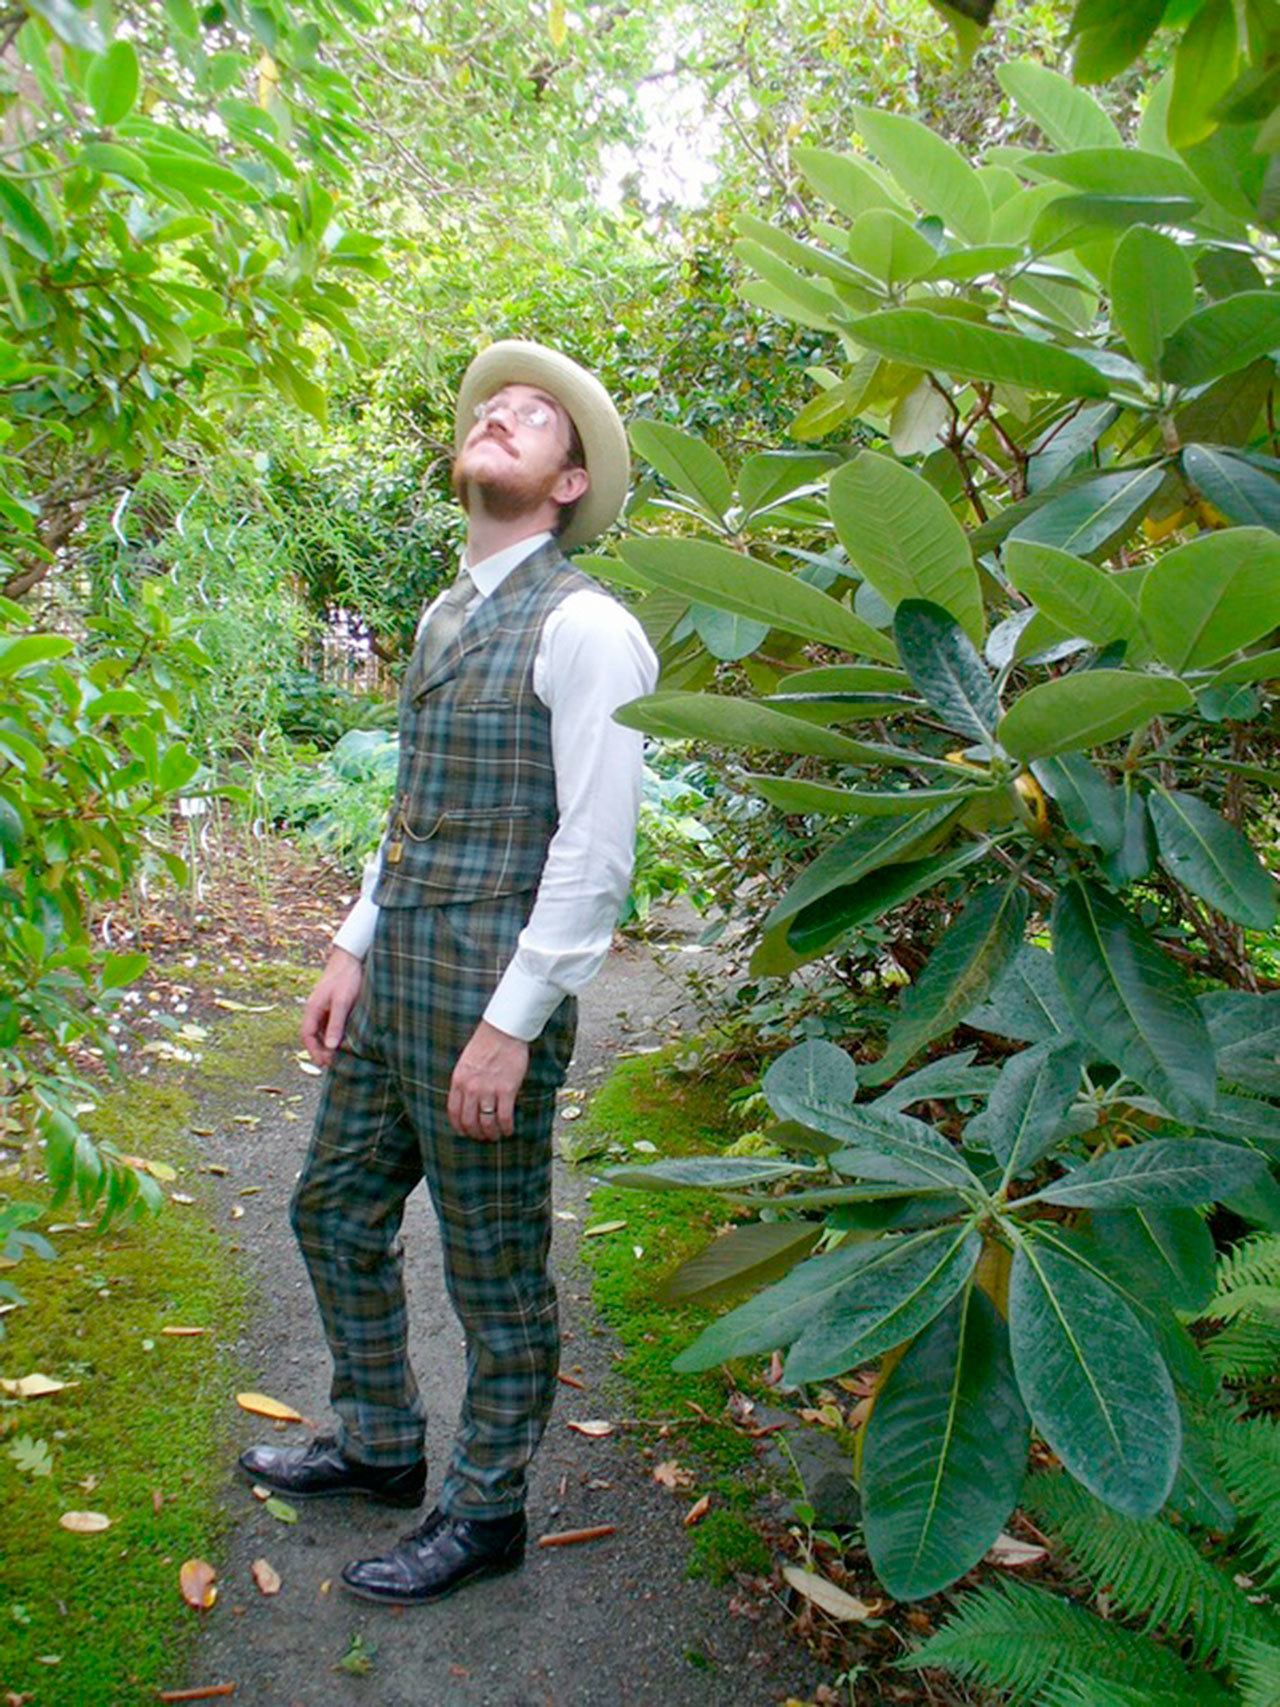 Gabriel Chrisman tours the Abkhazi Garden in Victoria the day after being asked to leave Butchart Gardens. (Gabriel Chrisman)